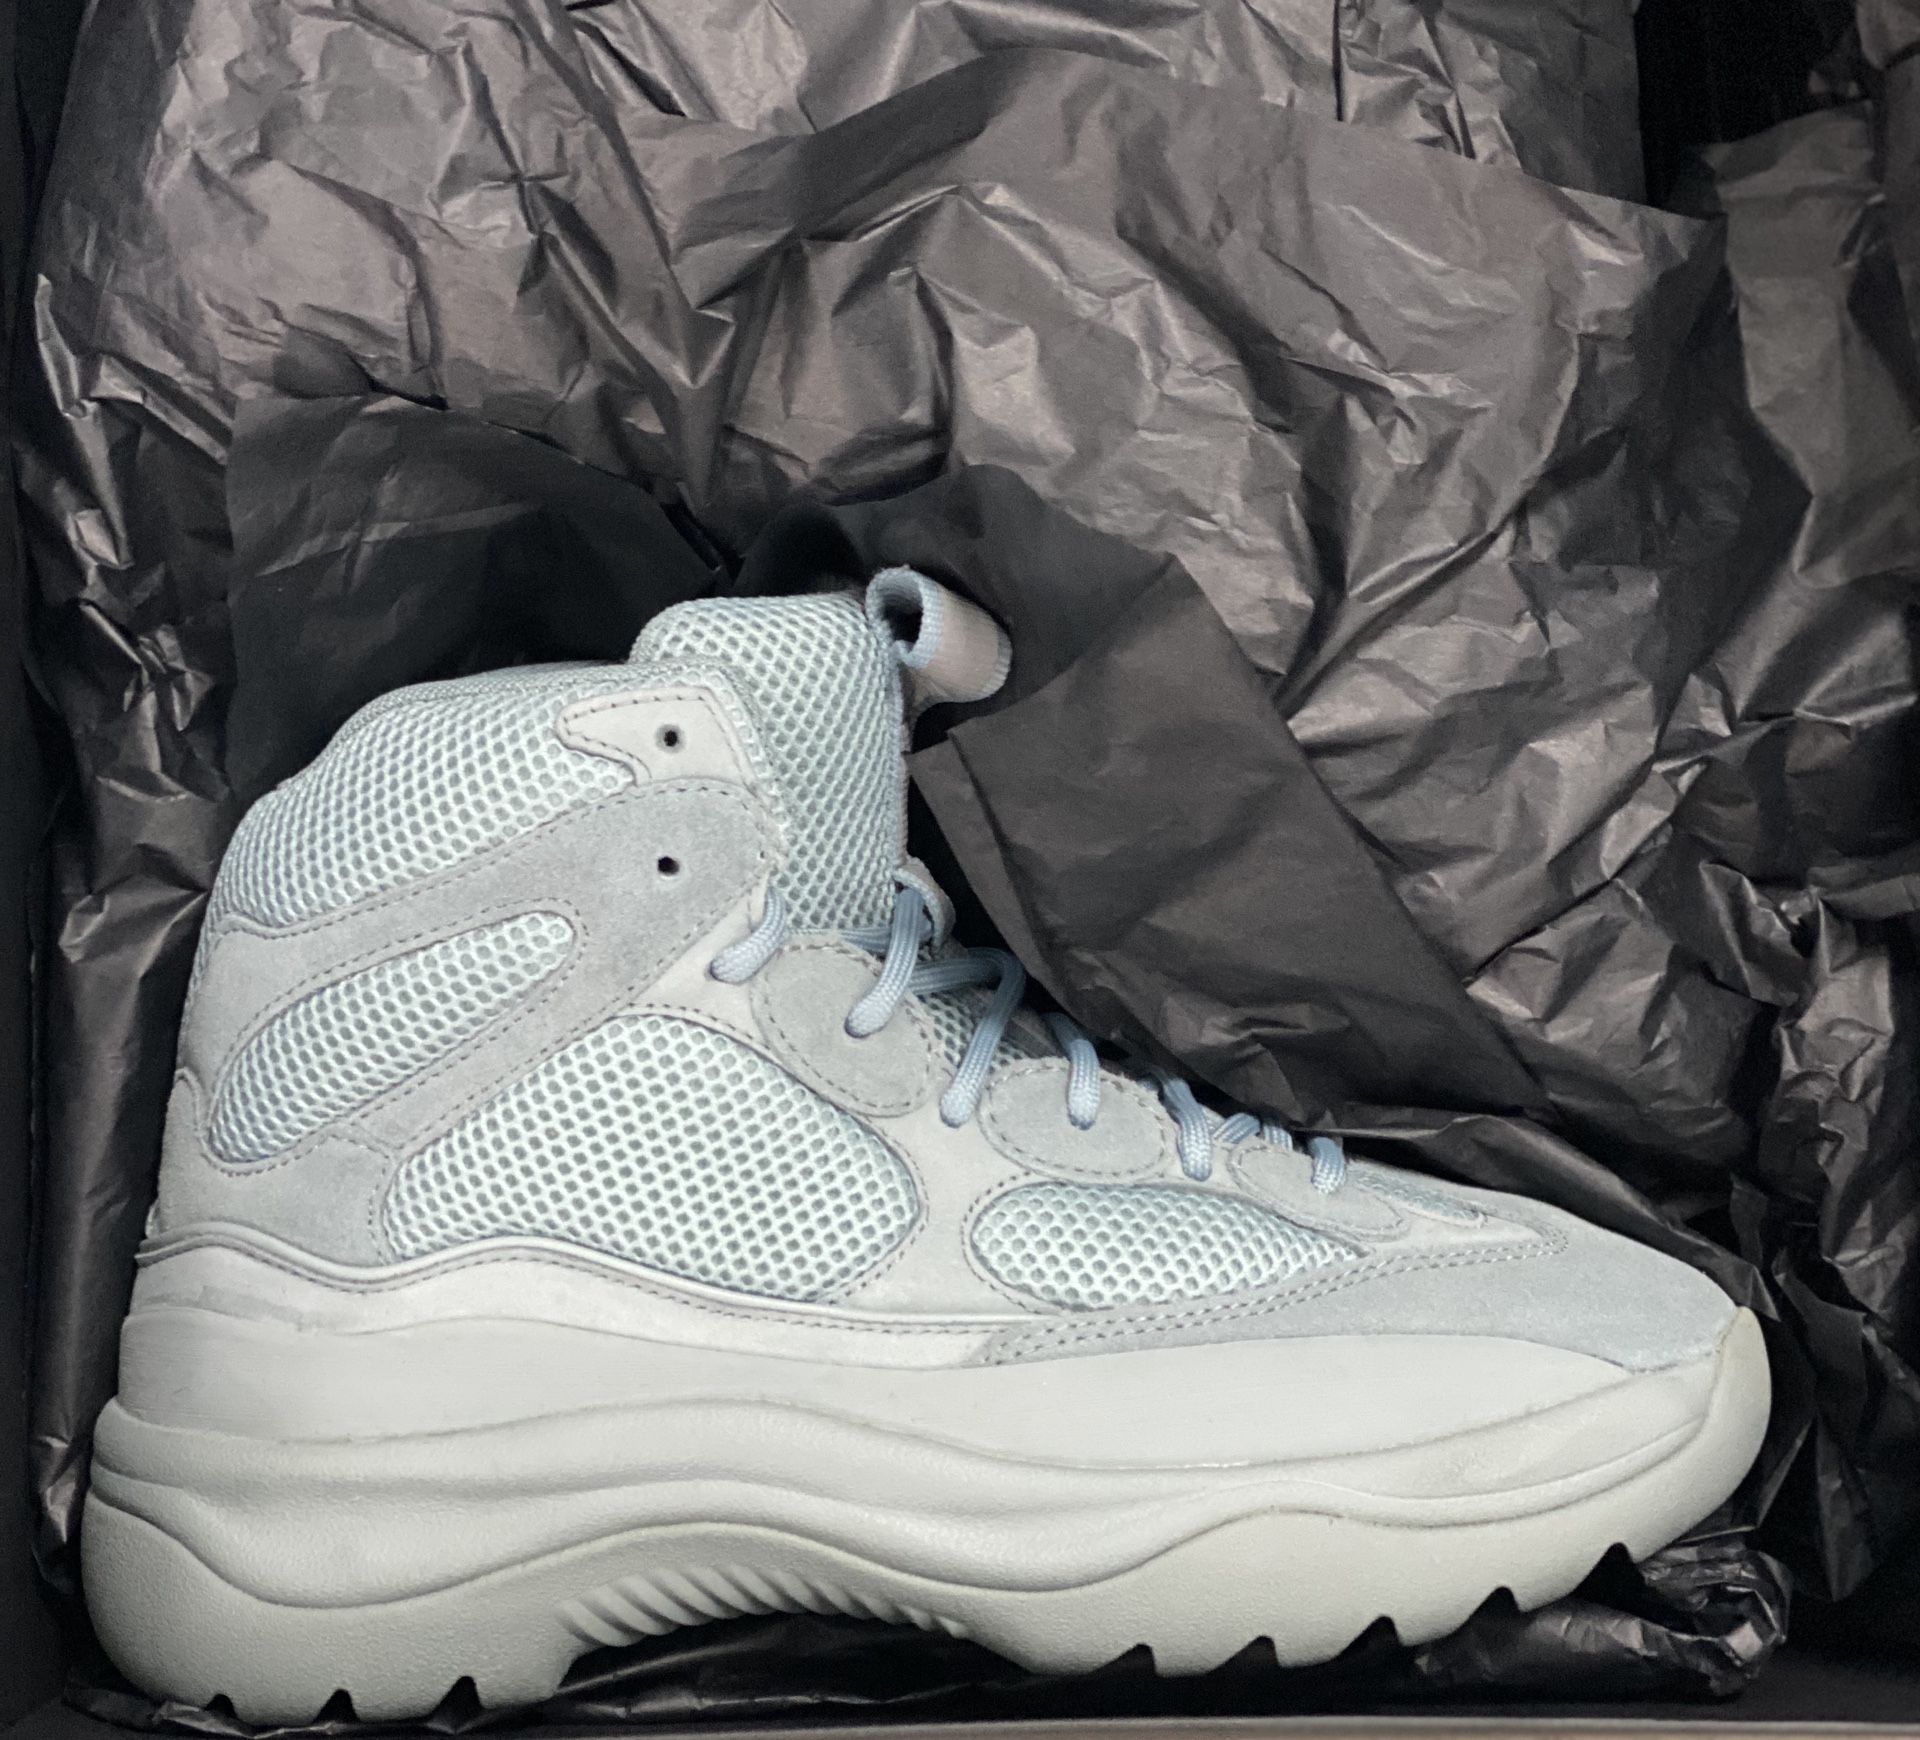 Yeezy Boots “House Blues”